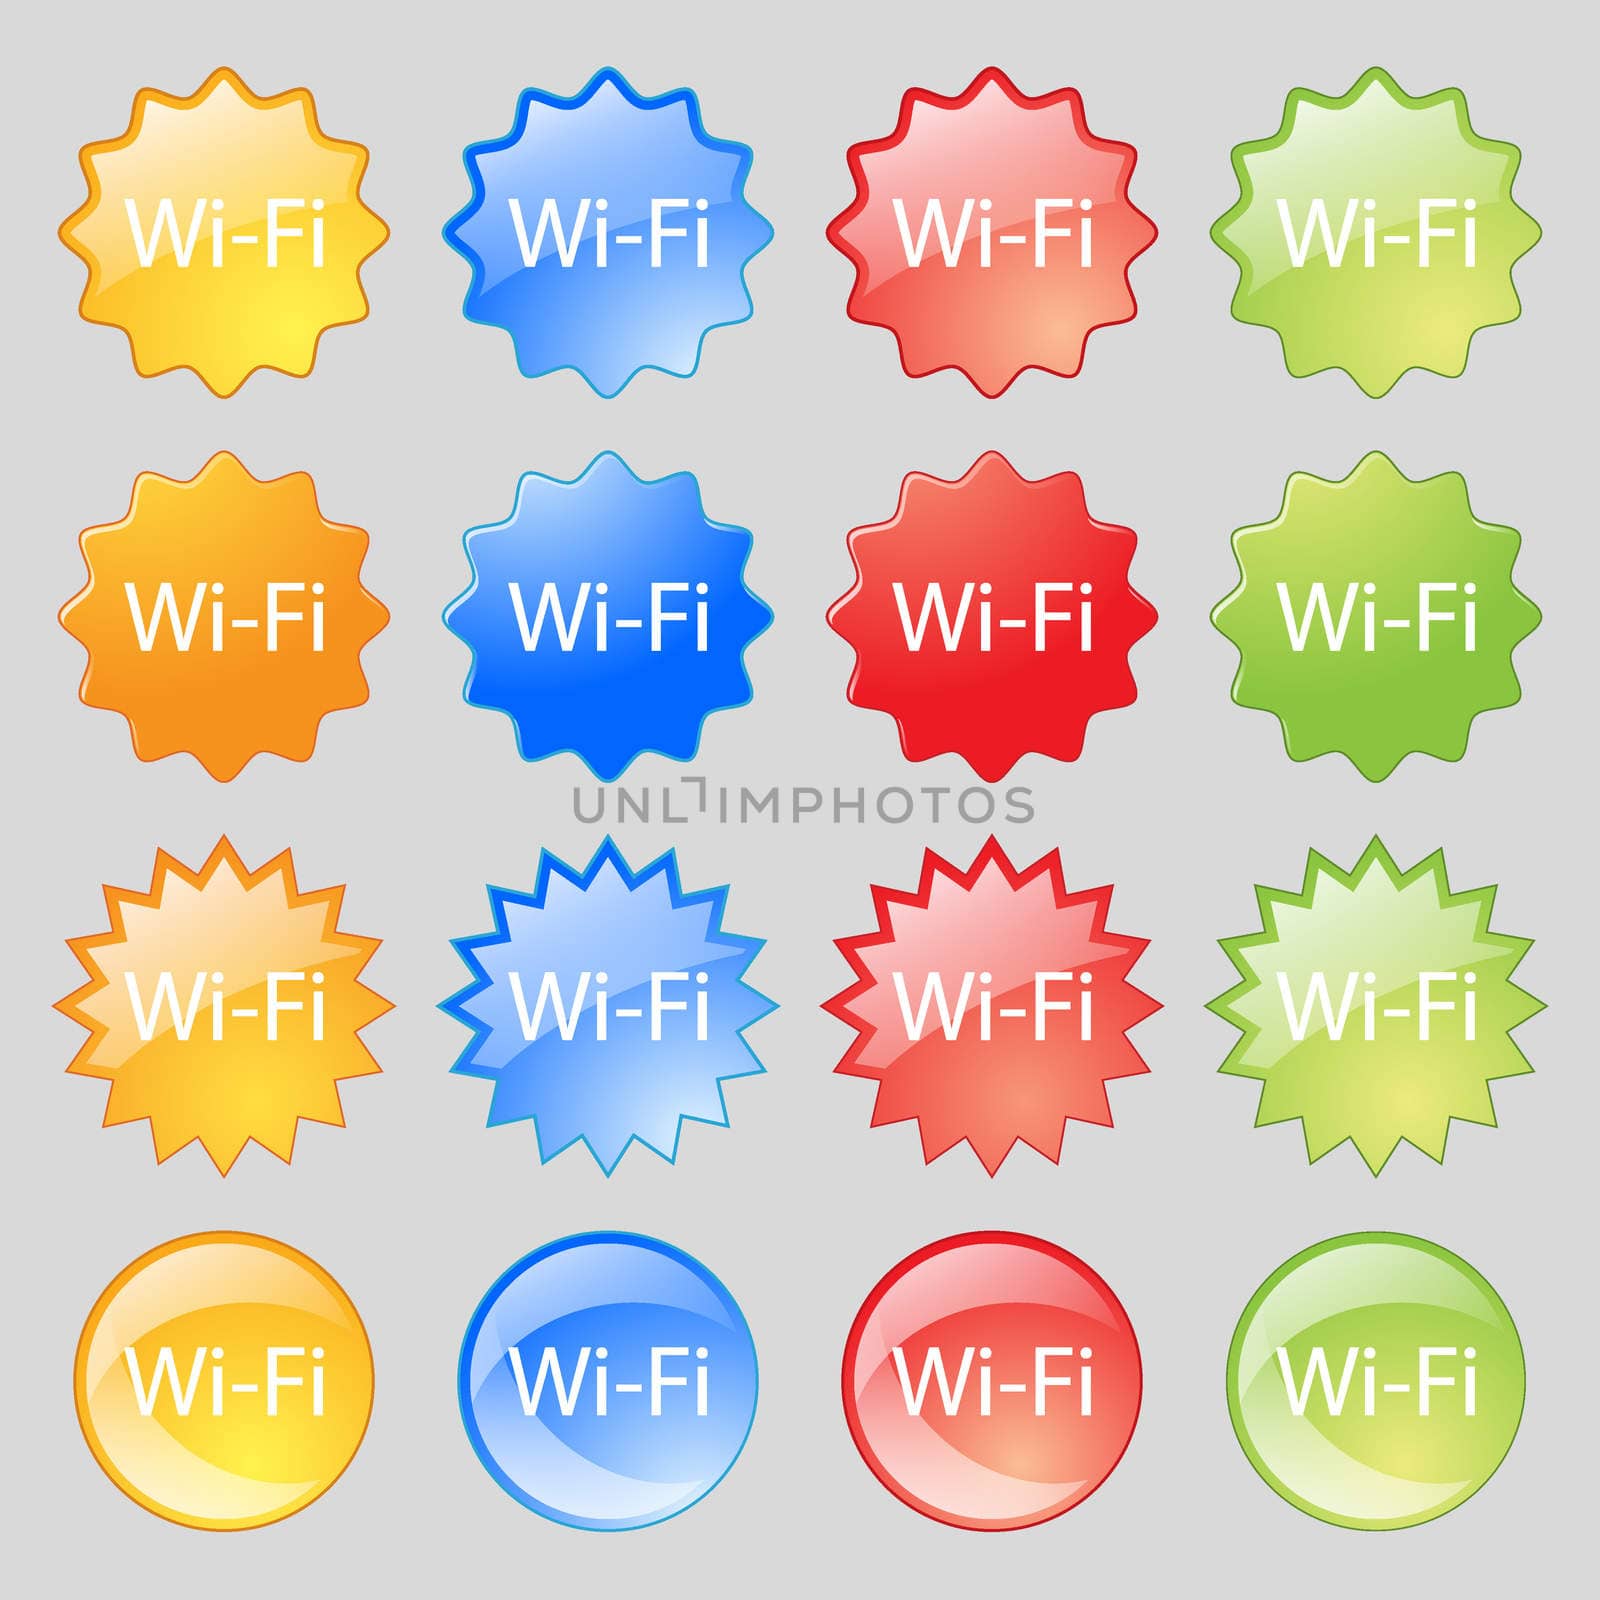 Free wifi sign. Wi-fi symbol. Wireless Network icon. Big set of 16 colorful modern buttons for your design. illustration